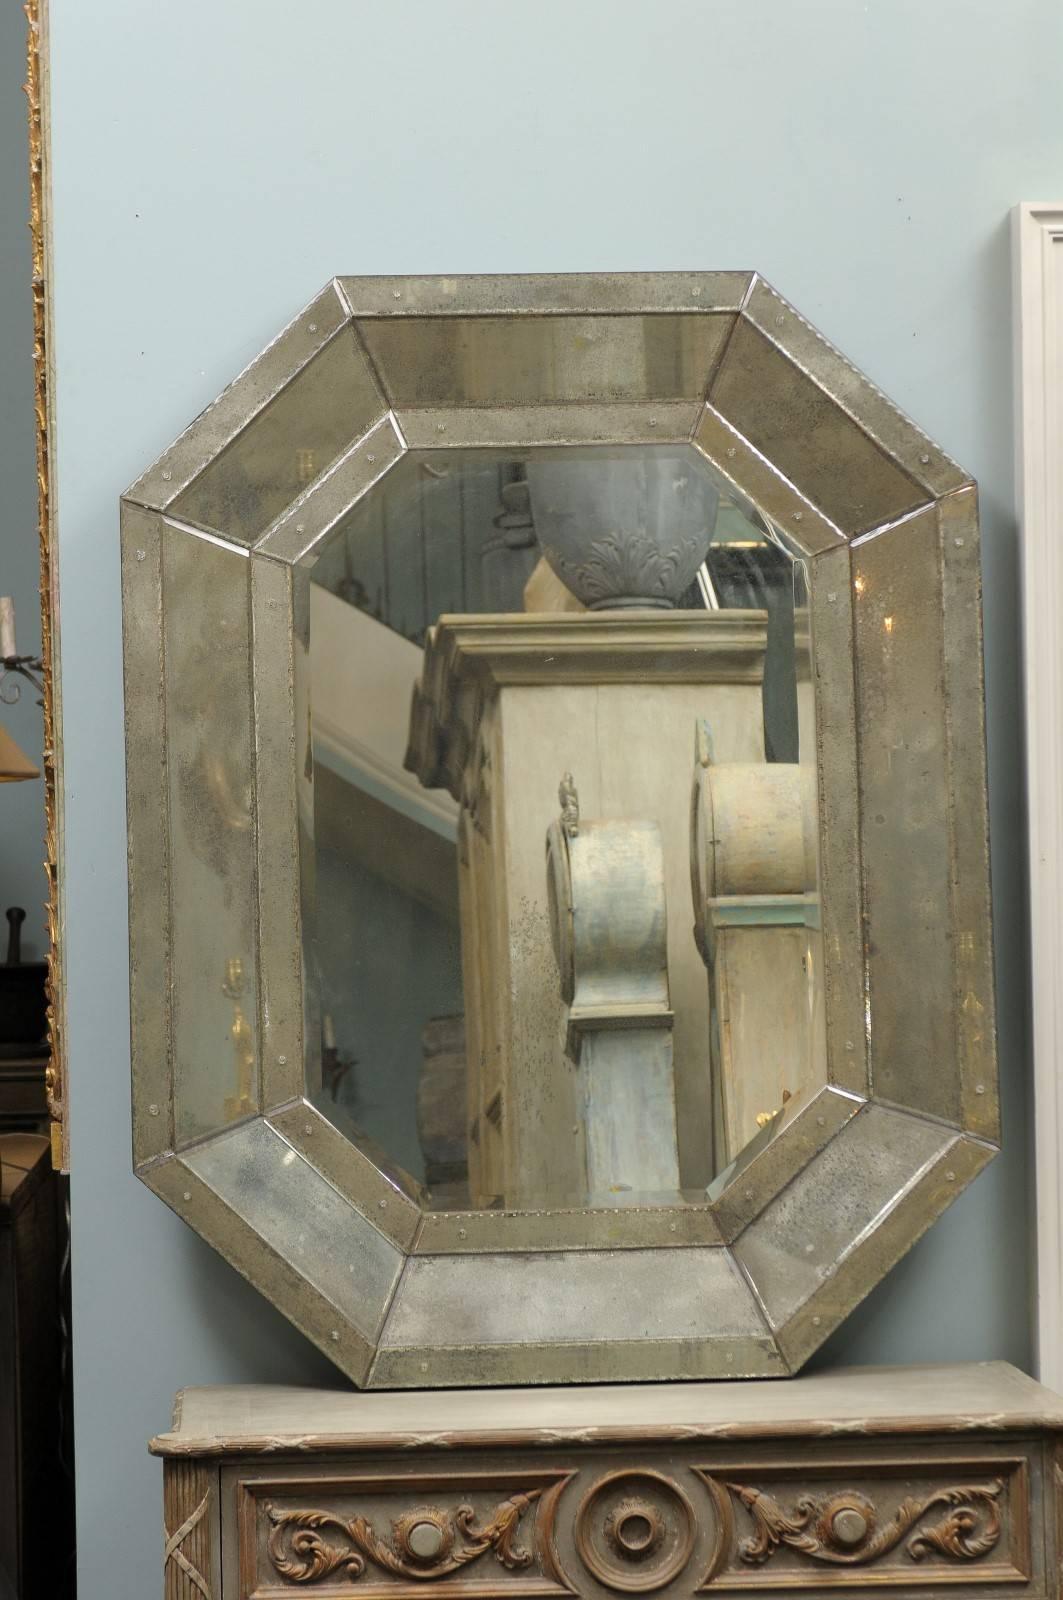 The Octagonal Venetian style mirror. The octagonal mirror features a beveled frame converging nicely towards the center, giving a lot of depth and life to the piece. It has been skillfully handmade and hand -silvered. The central glass panel is